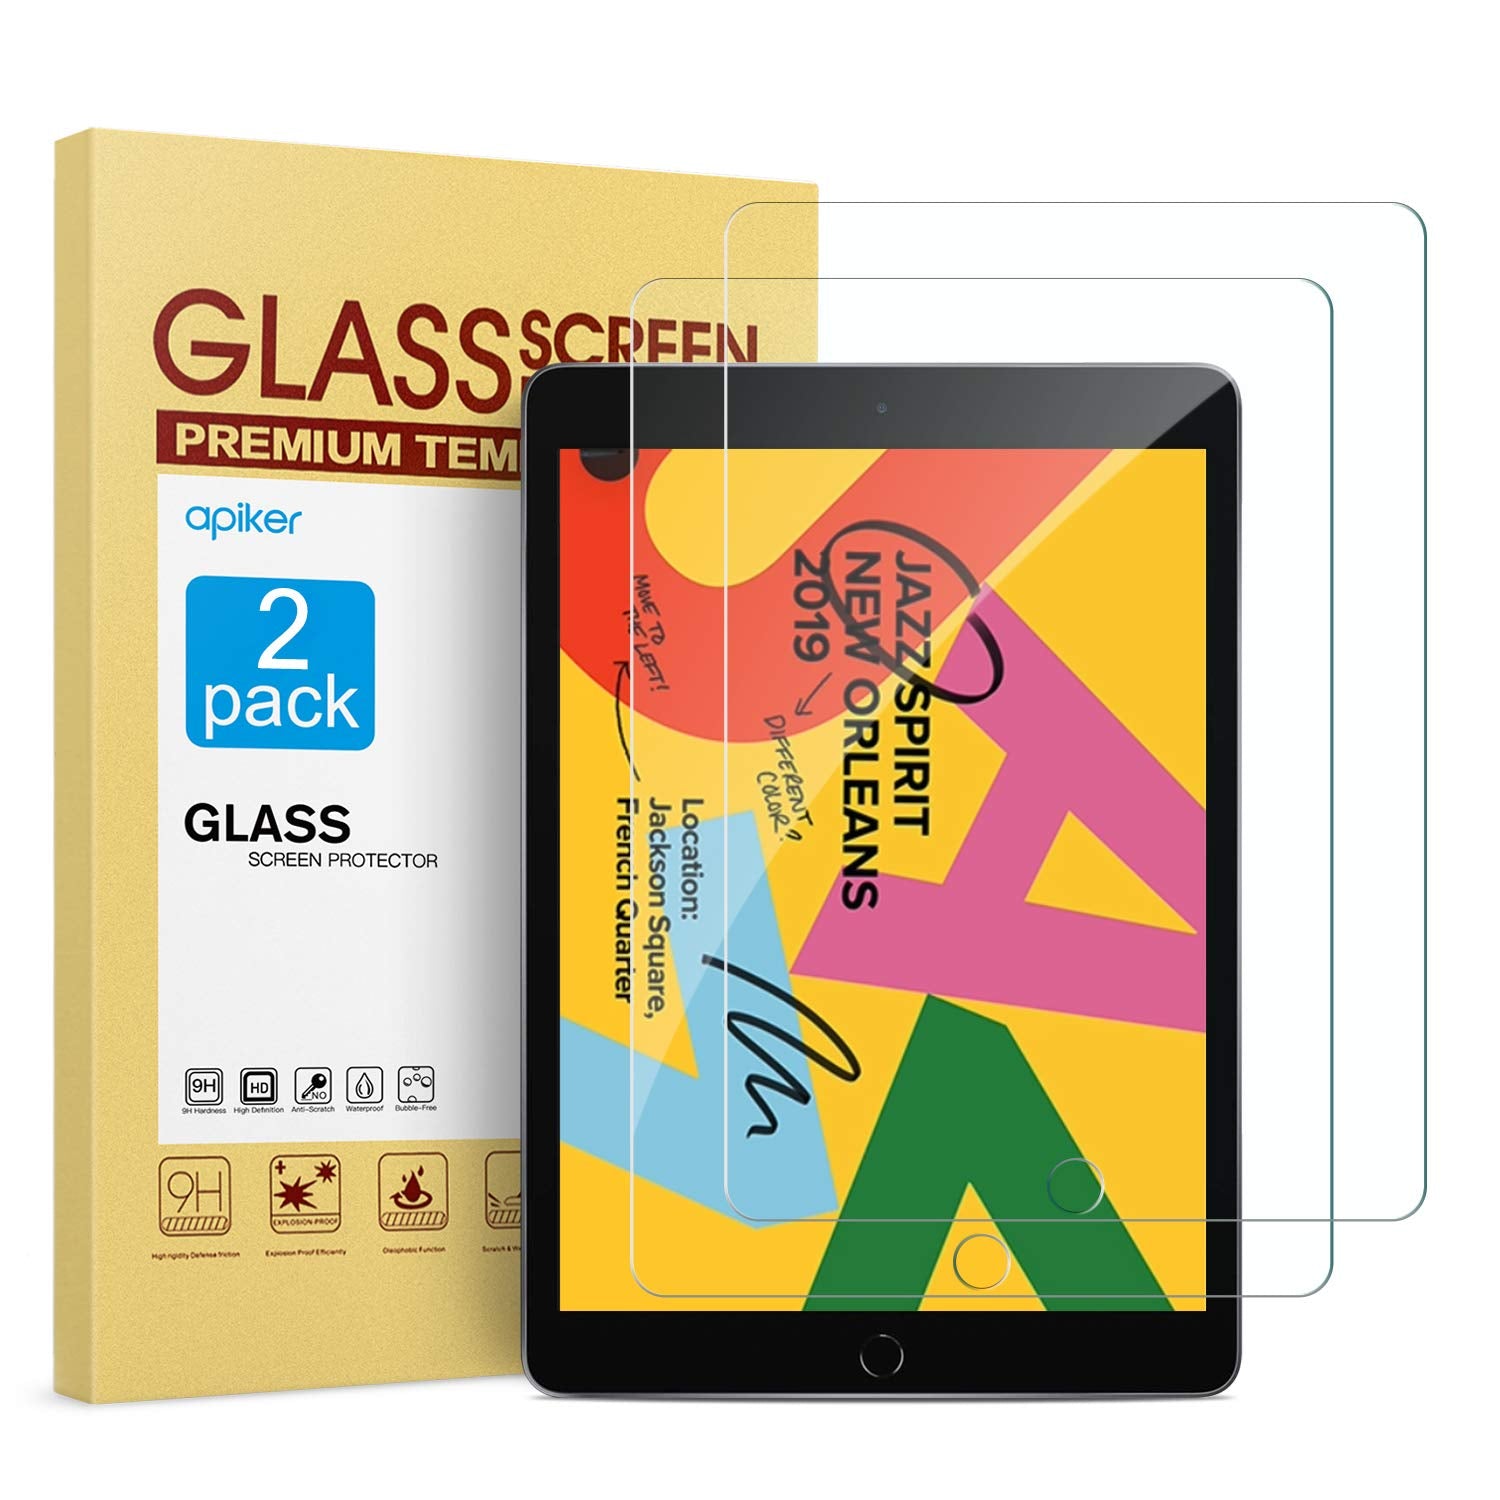 [2 Pack] Screen Protector for iPad 10.2 Inch 2019 Release, apiker Tempered Glass Screen Protector Compatible with Apple Pencil